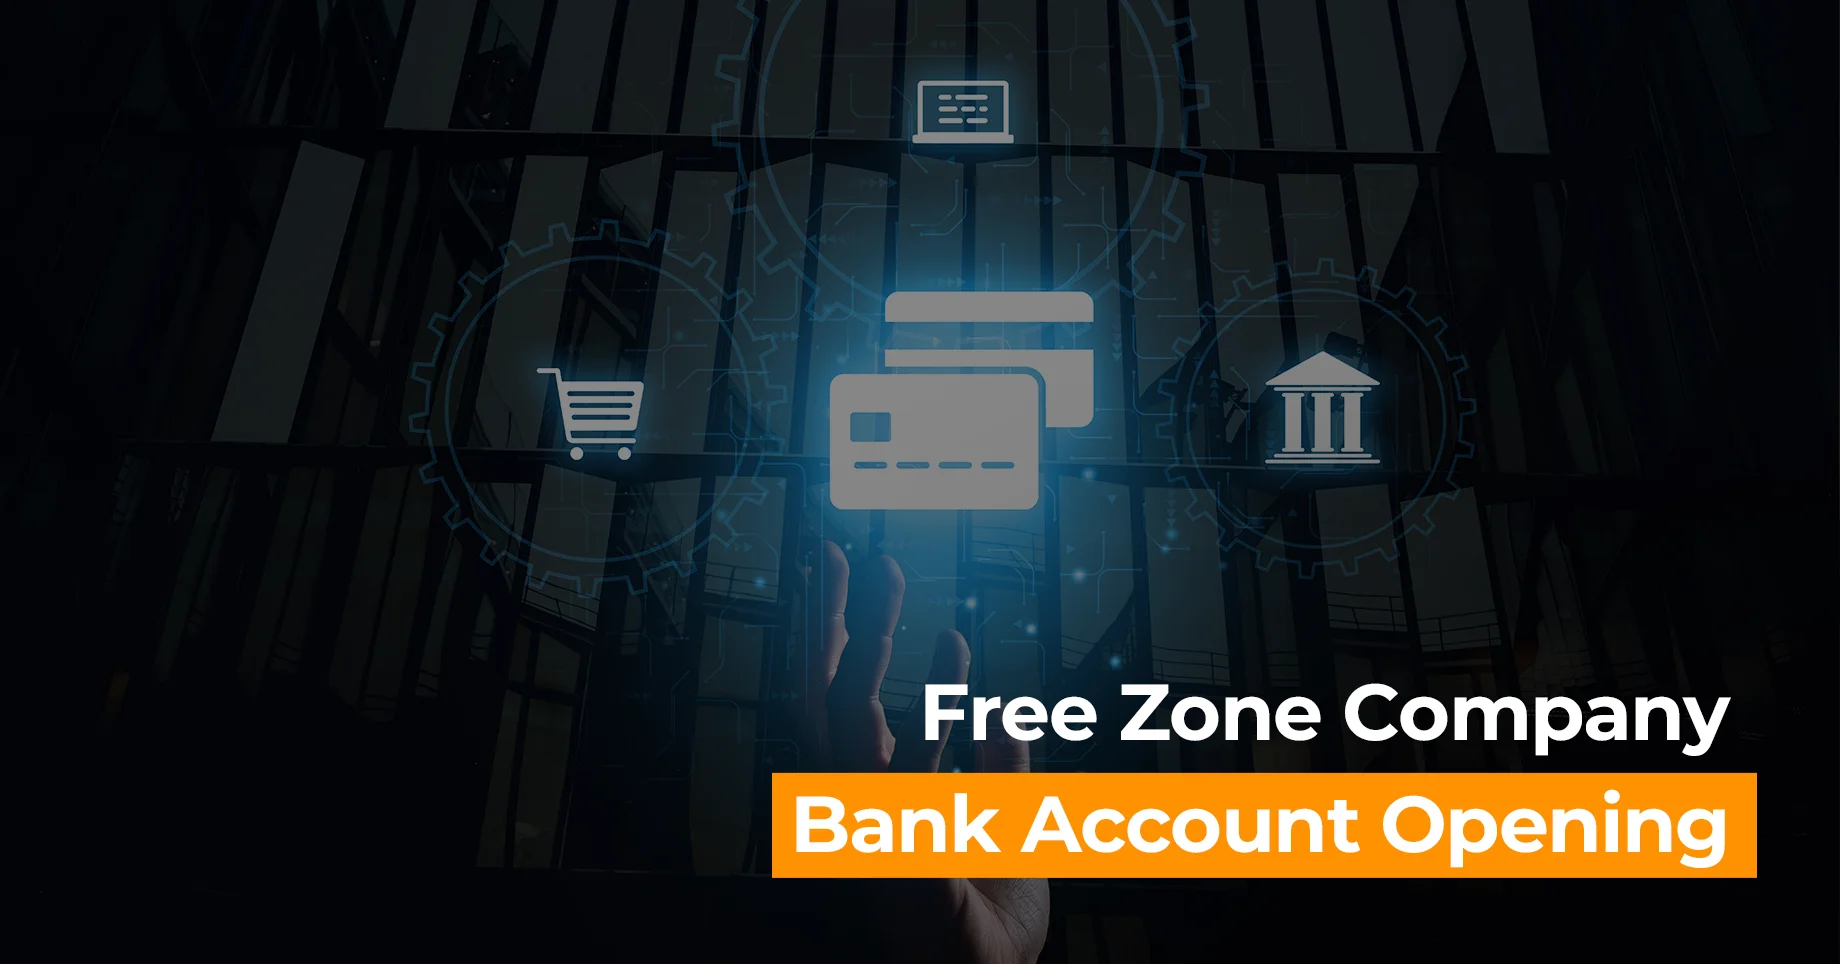 Free Zone Company Bank Account Opening